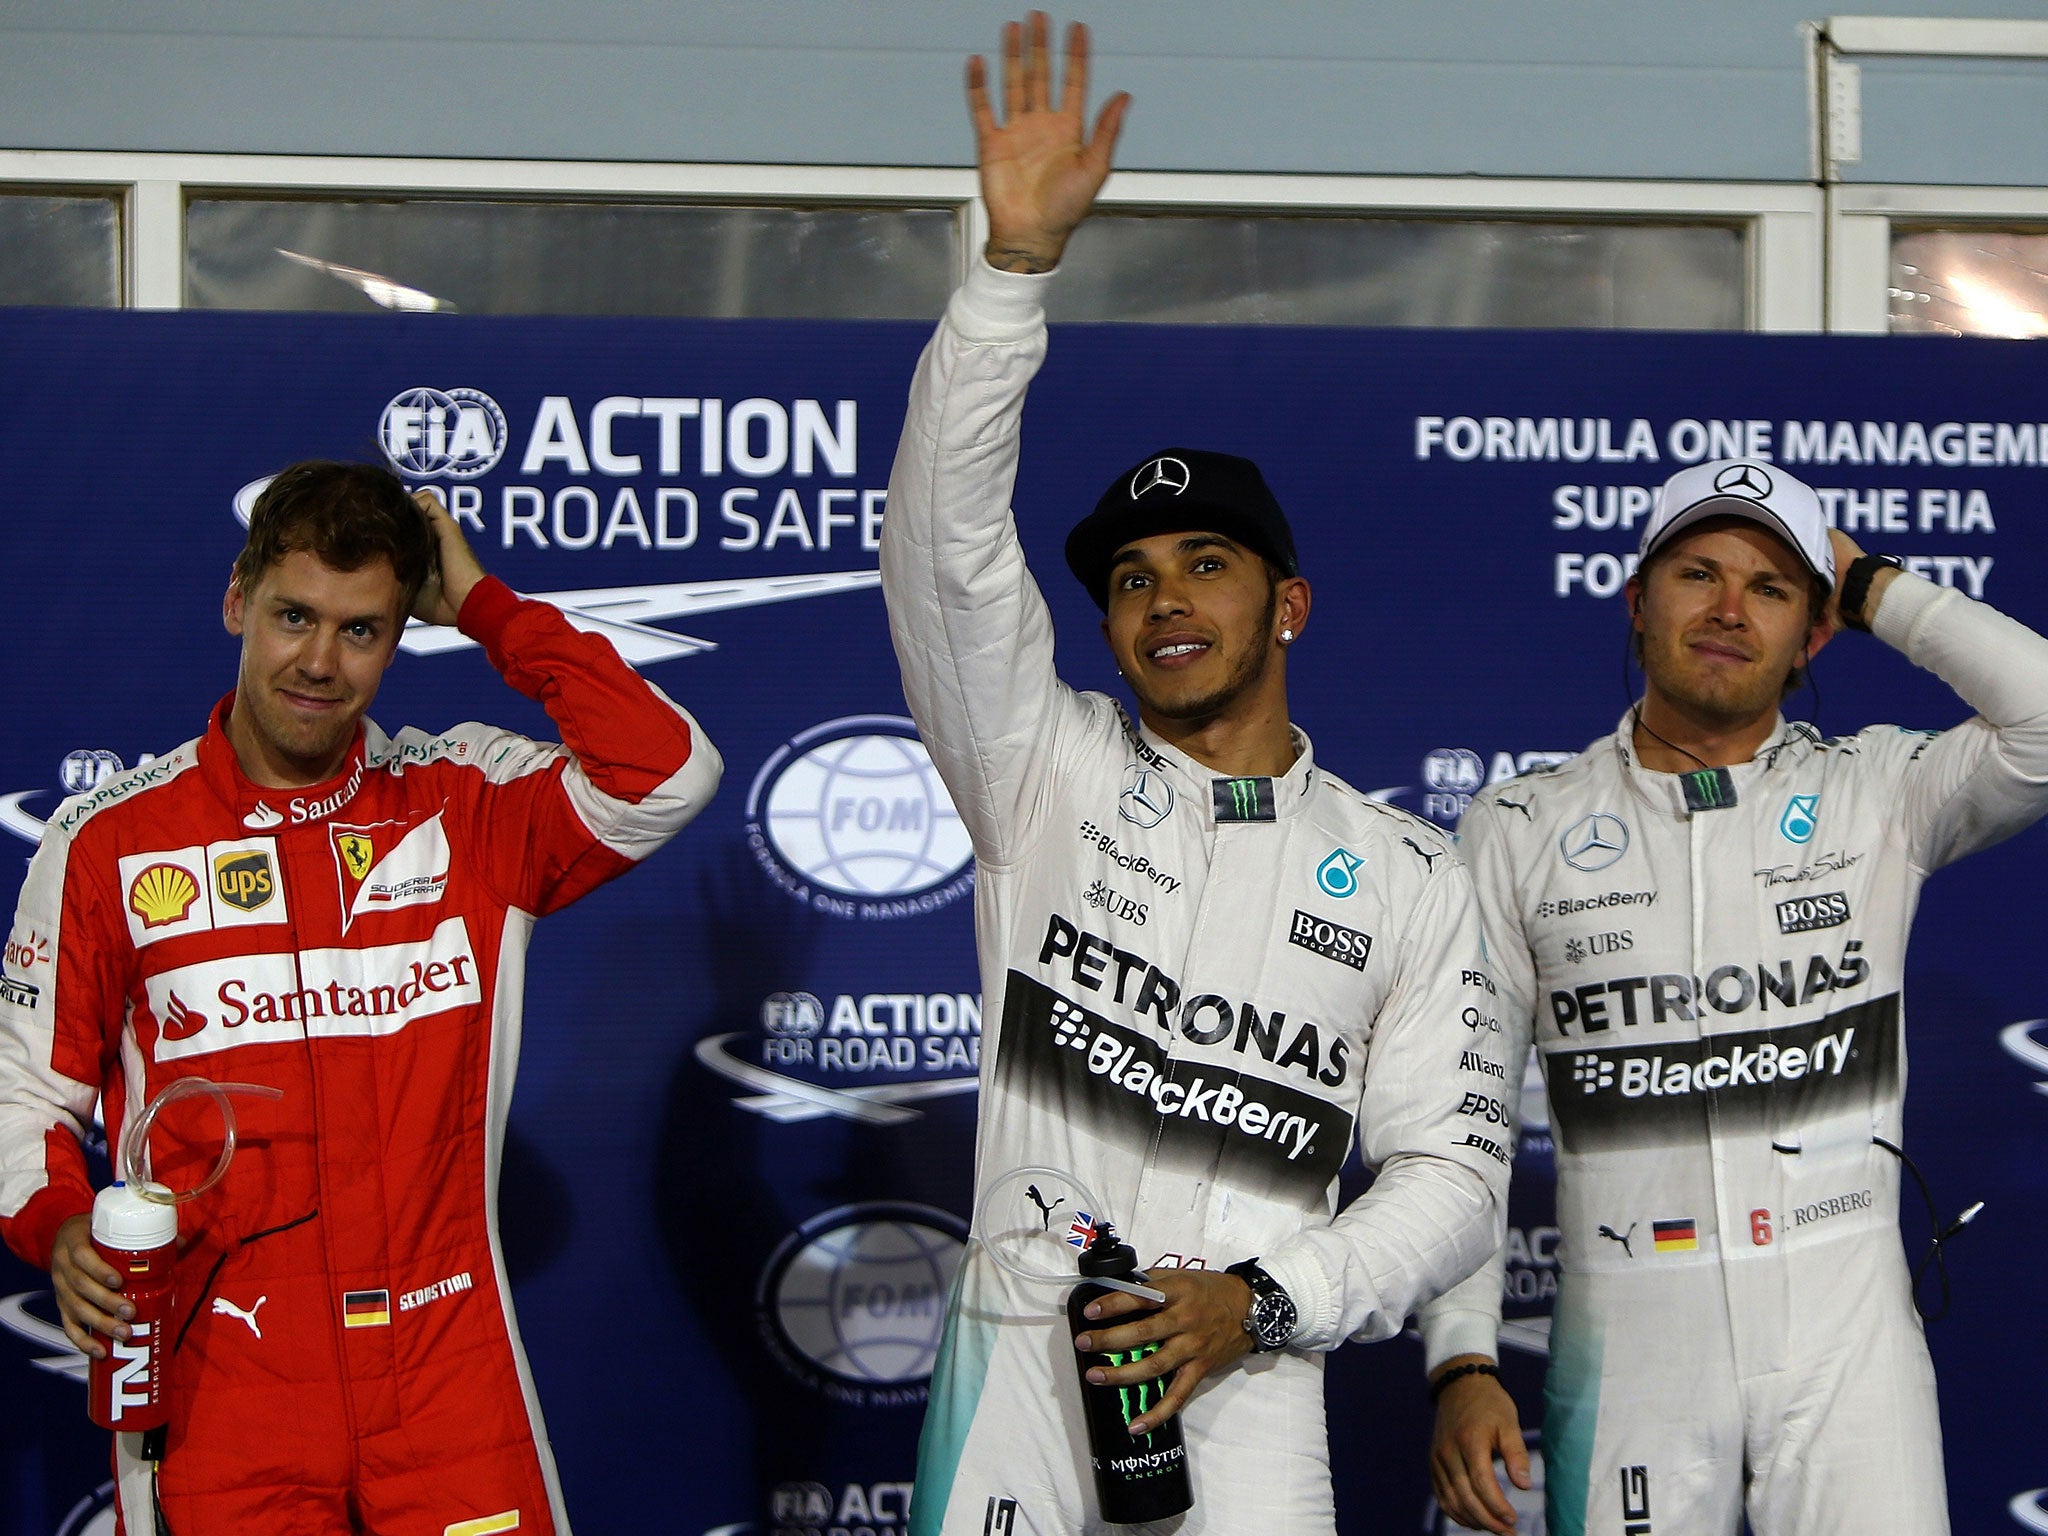 Lewis Hamilton will start the Bahrain Grand Prix from pole with Sebastian Vettel second and Nico Rosberg third